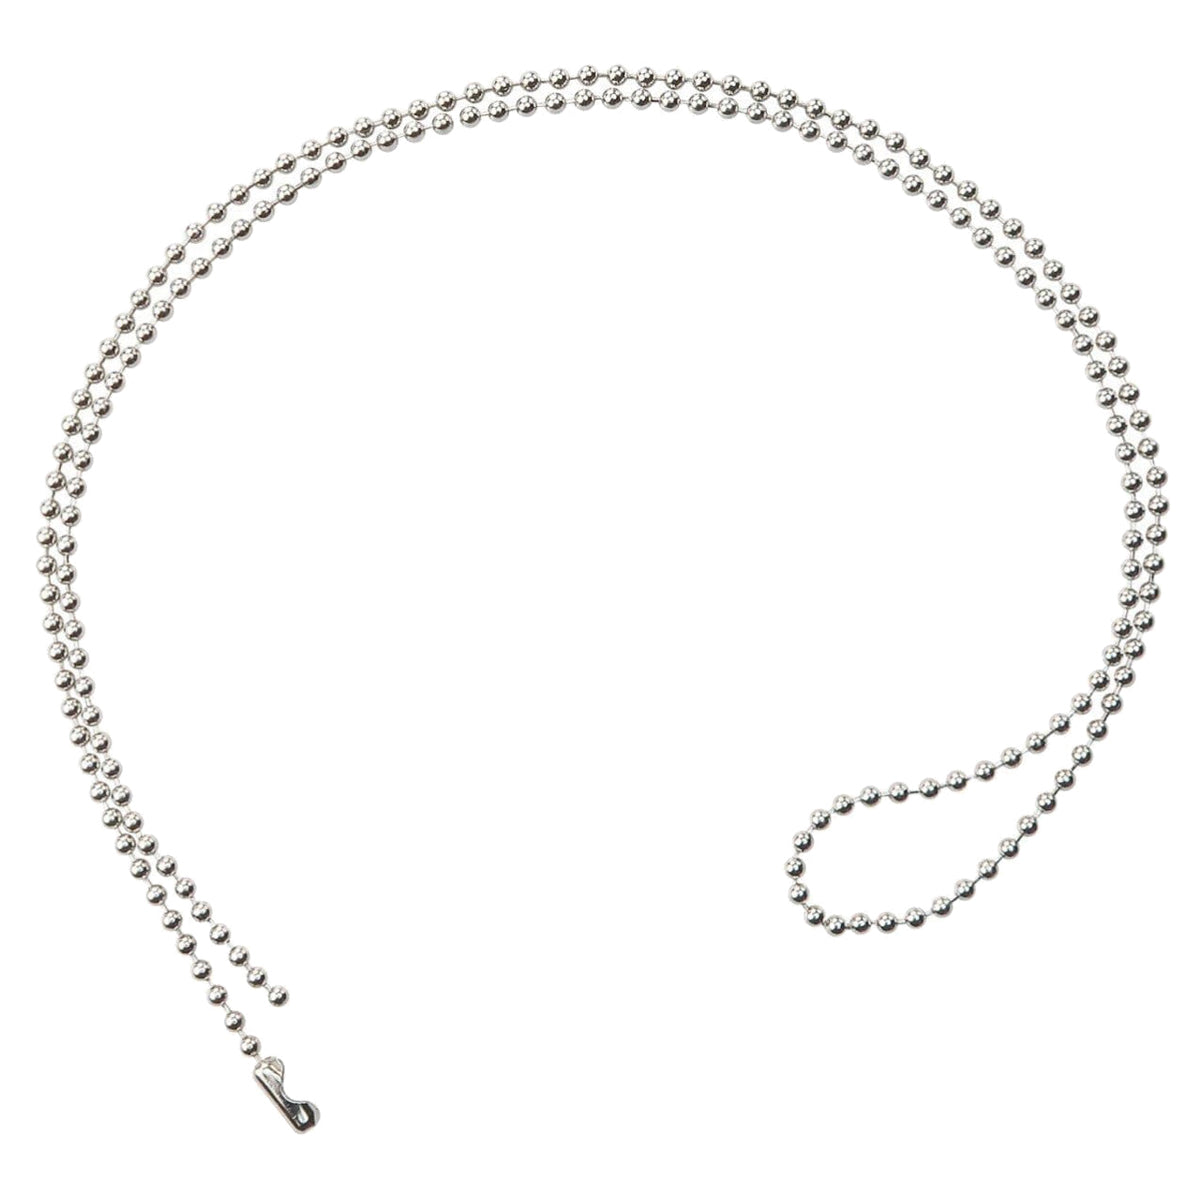 2125-1000 Nickel-Plated Steel 24" Beaded Neck Chain